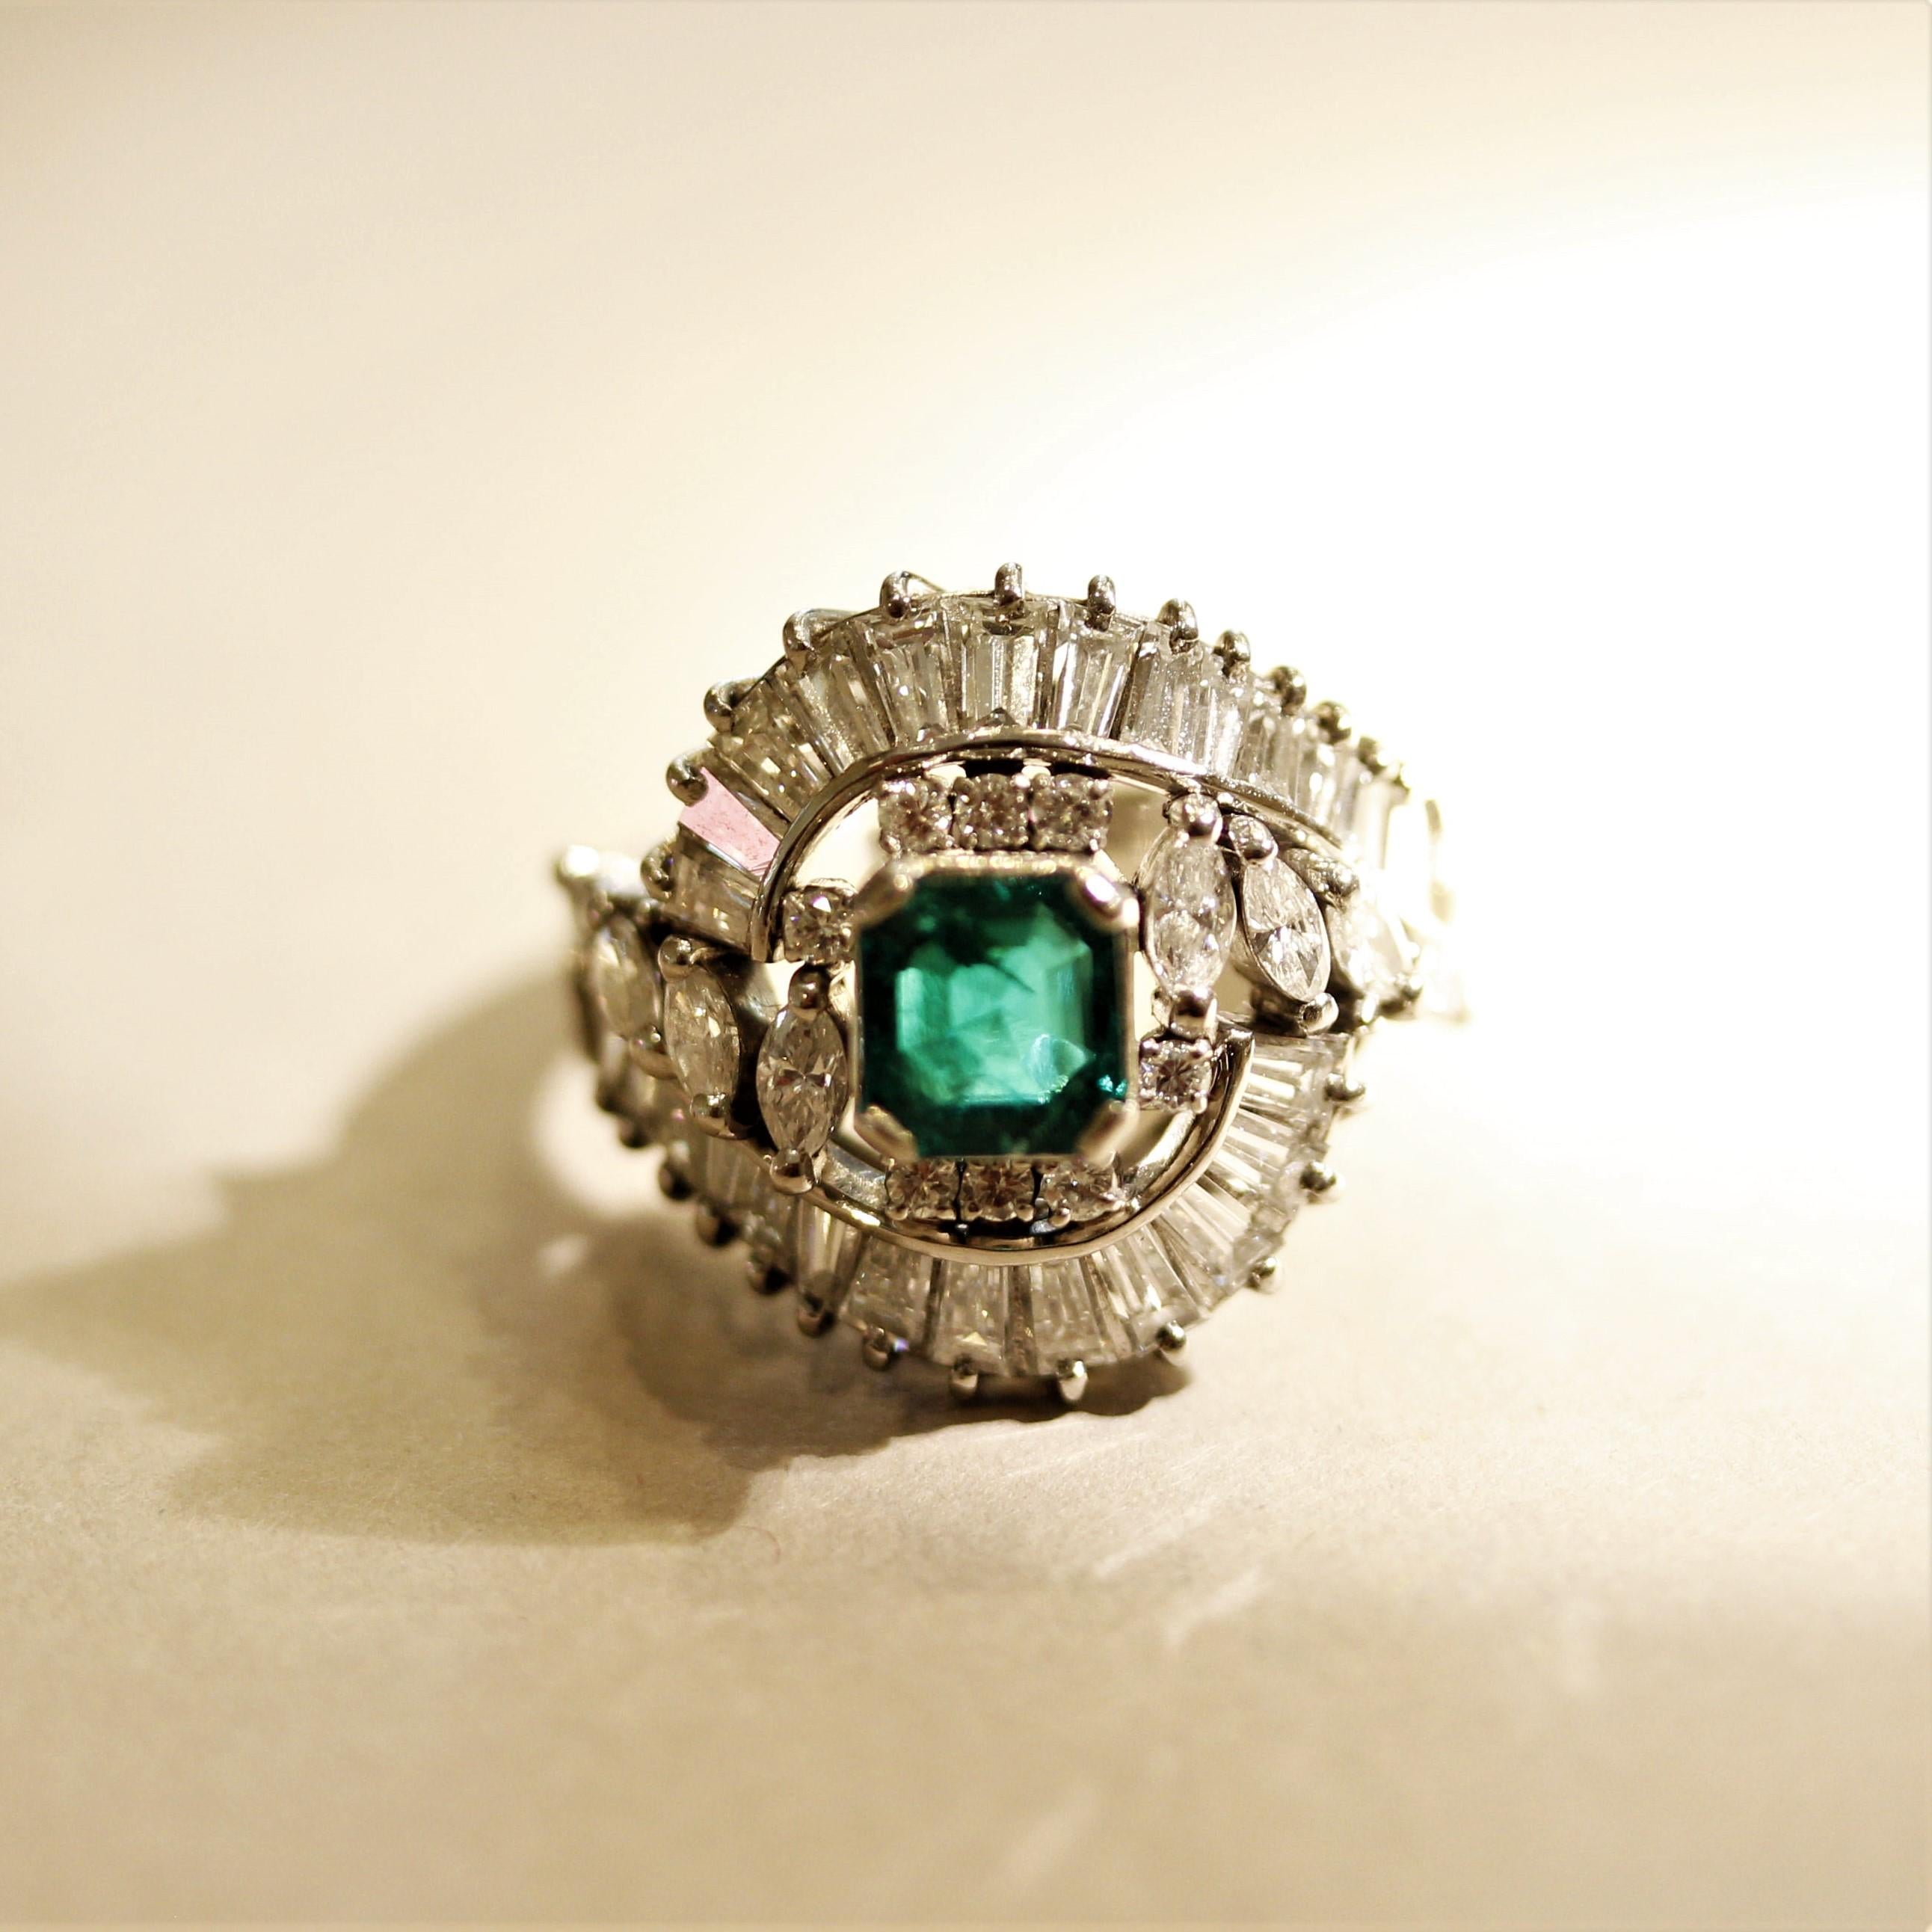 A superb ring in terms of the quality of the stones as well as the classy design. This mid-century treasure, circa 1960’s, features a gem 1.35 carat square-shaped emerald with a vivid grass-green color and is free of any large visible inclusions